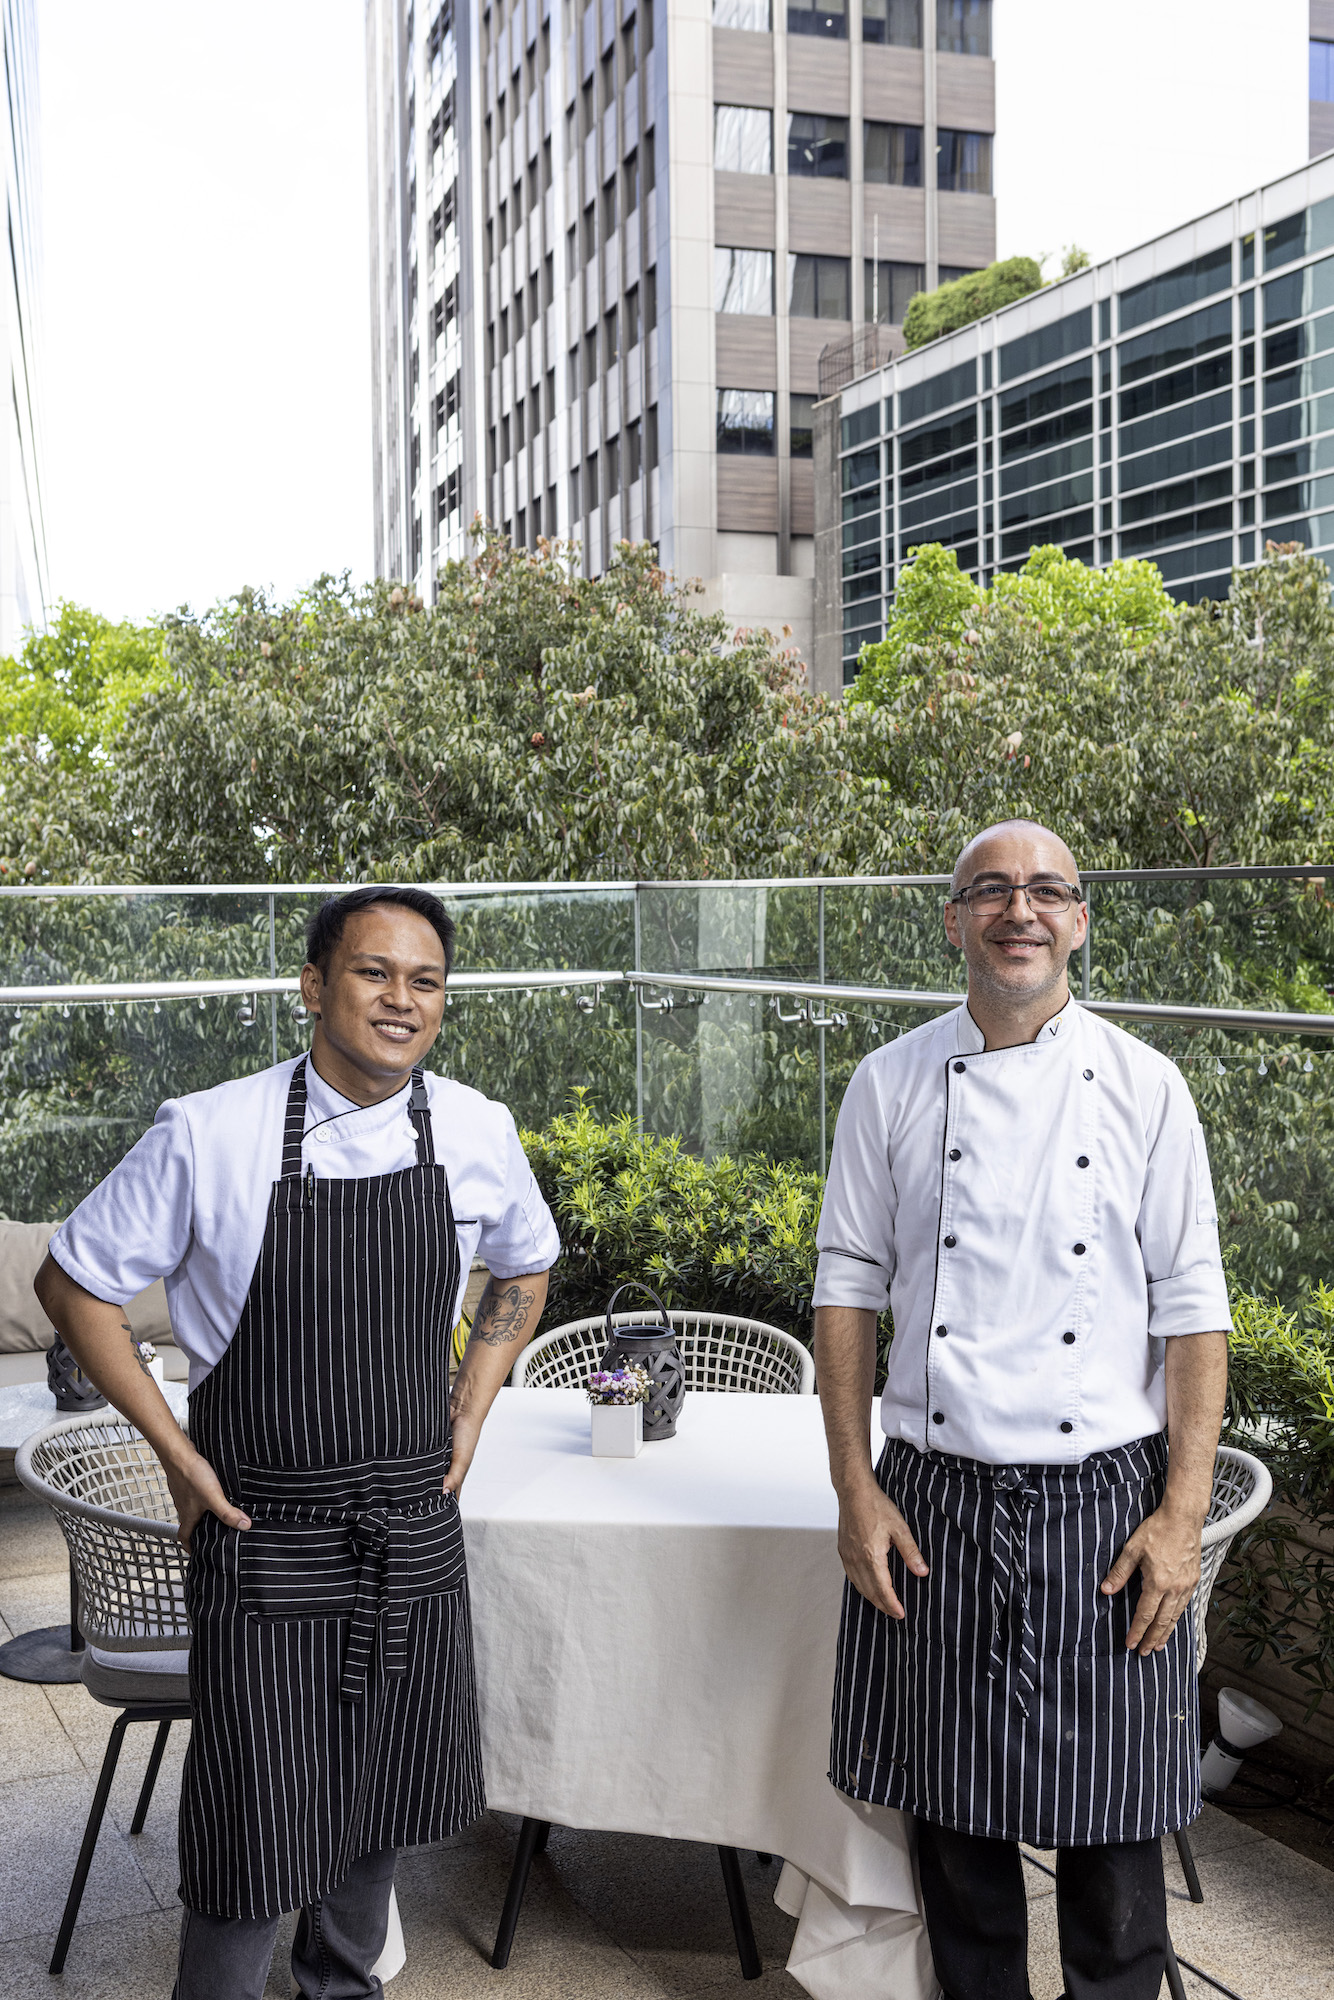 Chefs Jorn Fonseca and Carlos Garcia might be busy taking care of the hotel's F&B needs but they find some quiet time here at Tiago's private al fresco dining area